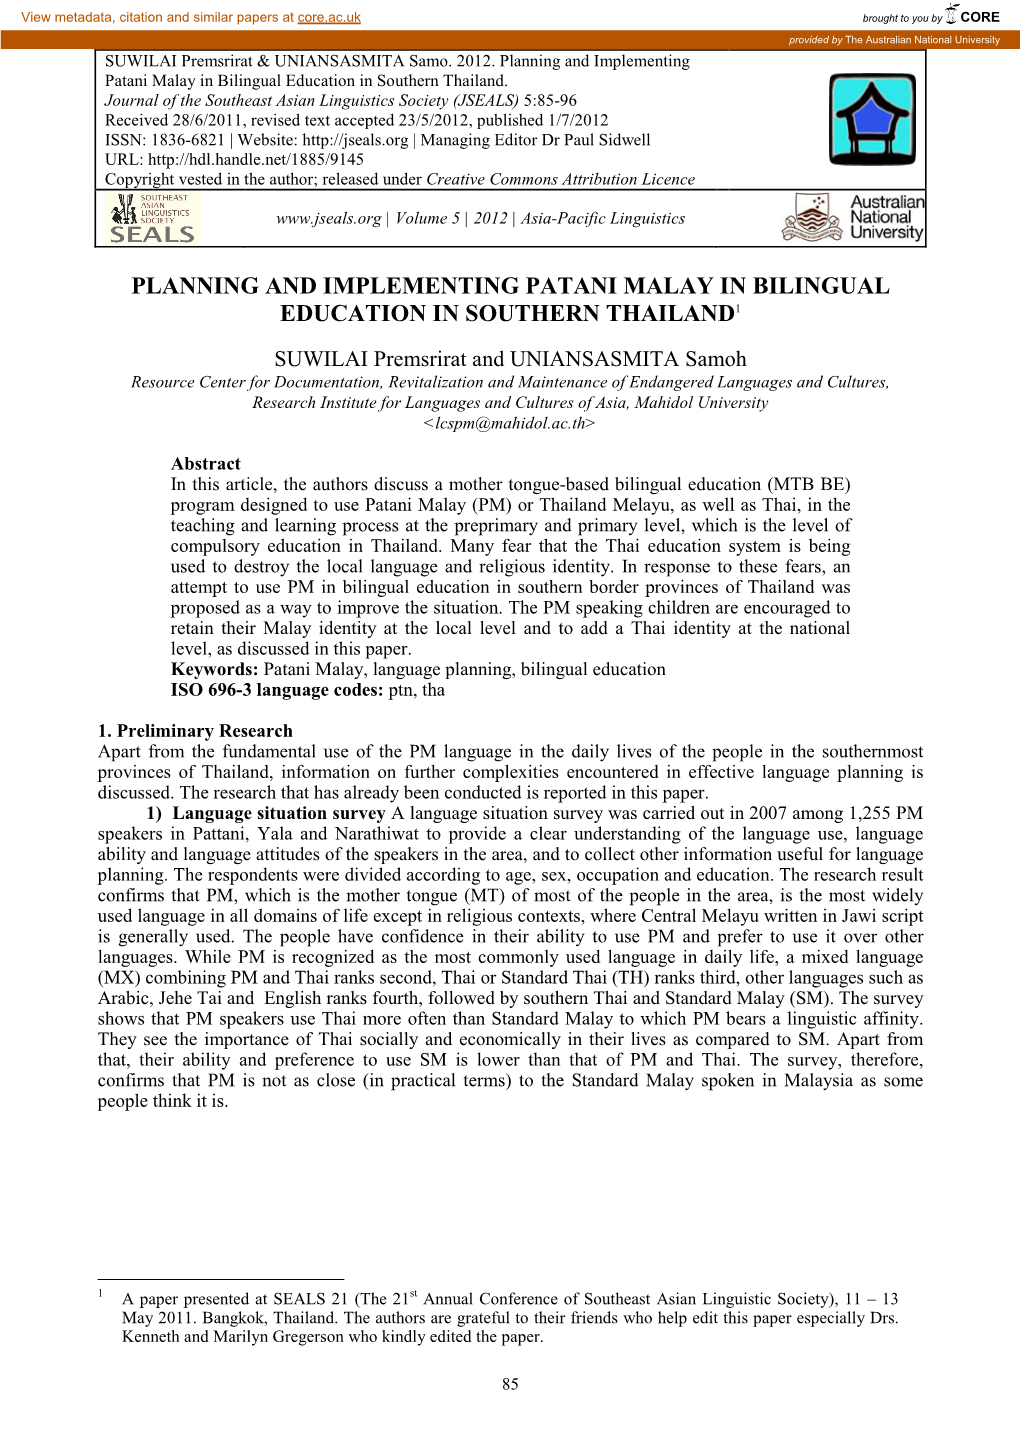 Planning and Implementing Patani Malay in Bilingual Education in Southern Thailand